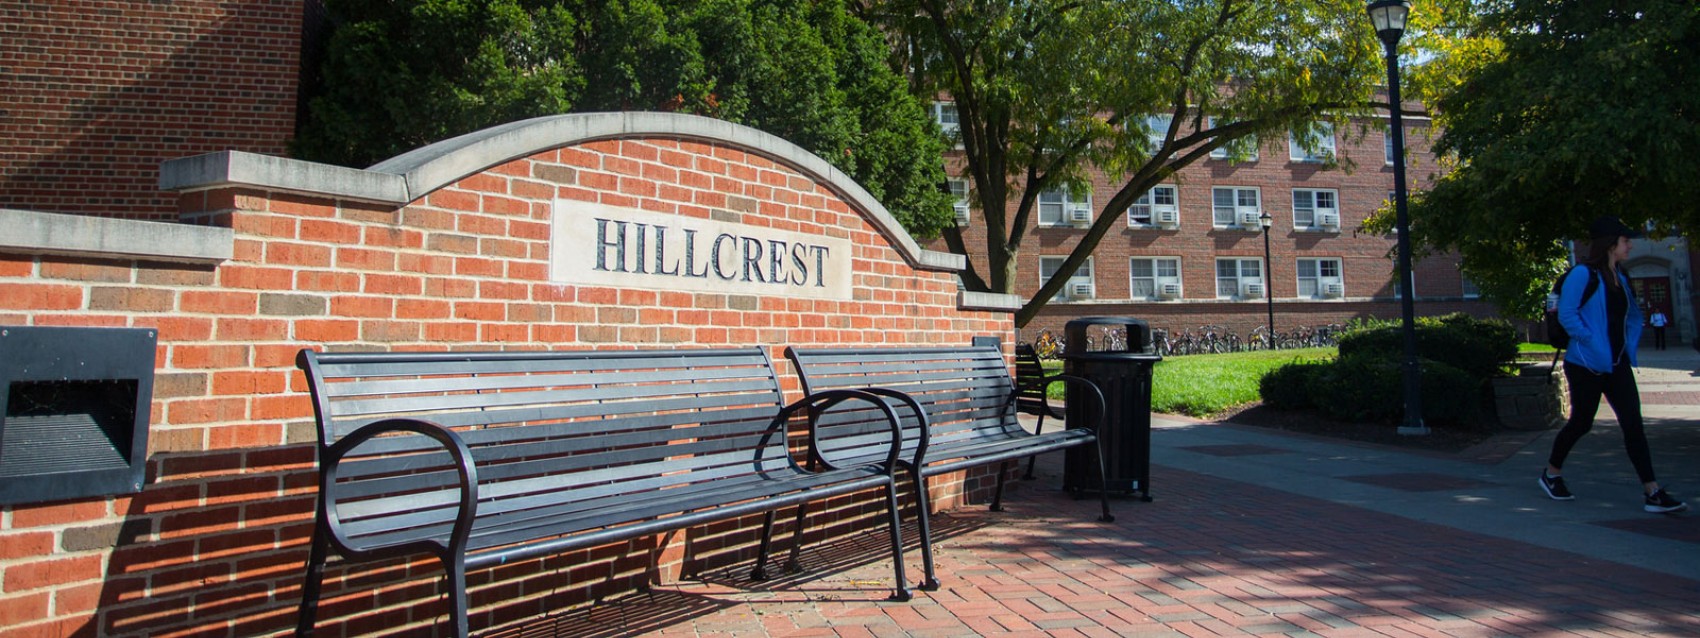 Hillcrest entrance with benches and students walking near the stone sign that contains the text 'Hillcrest'